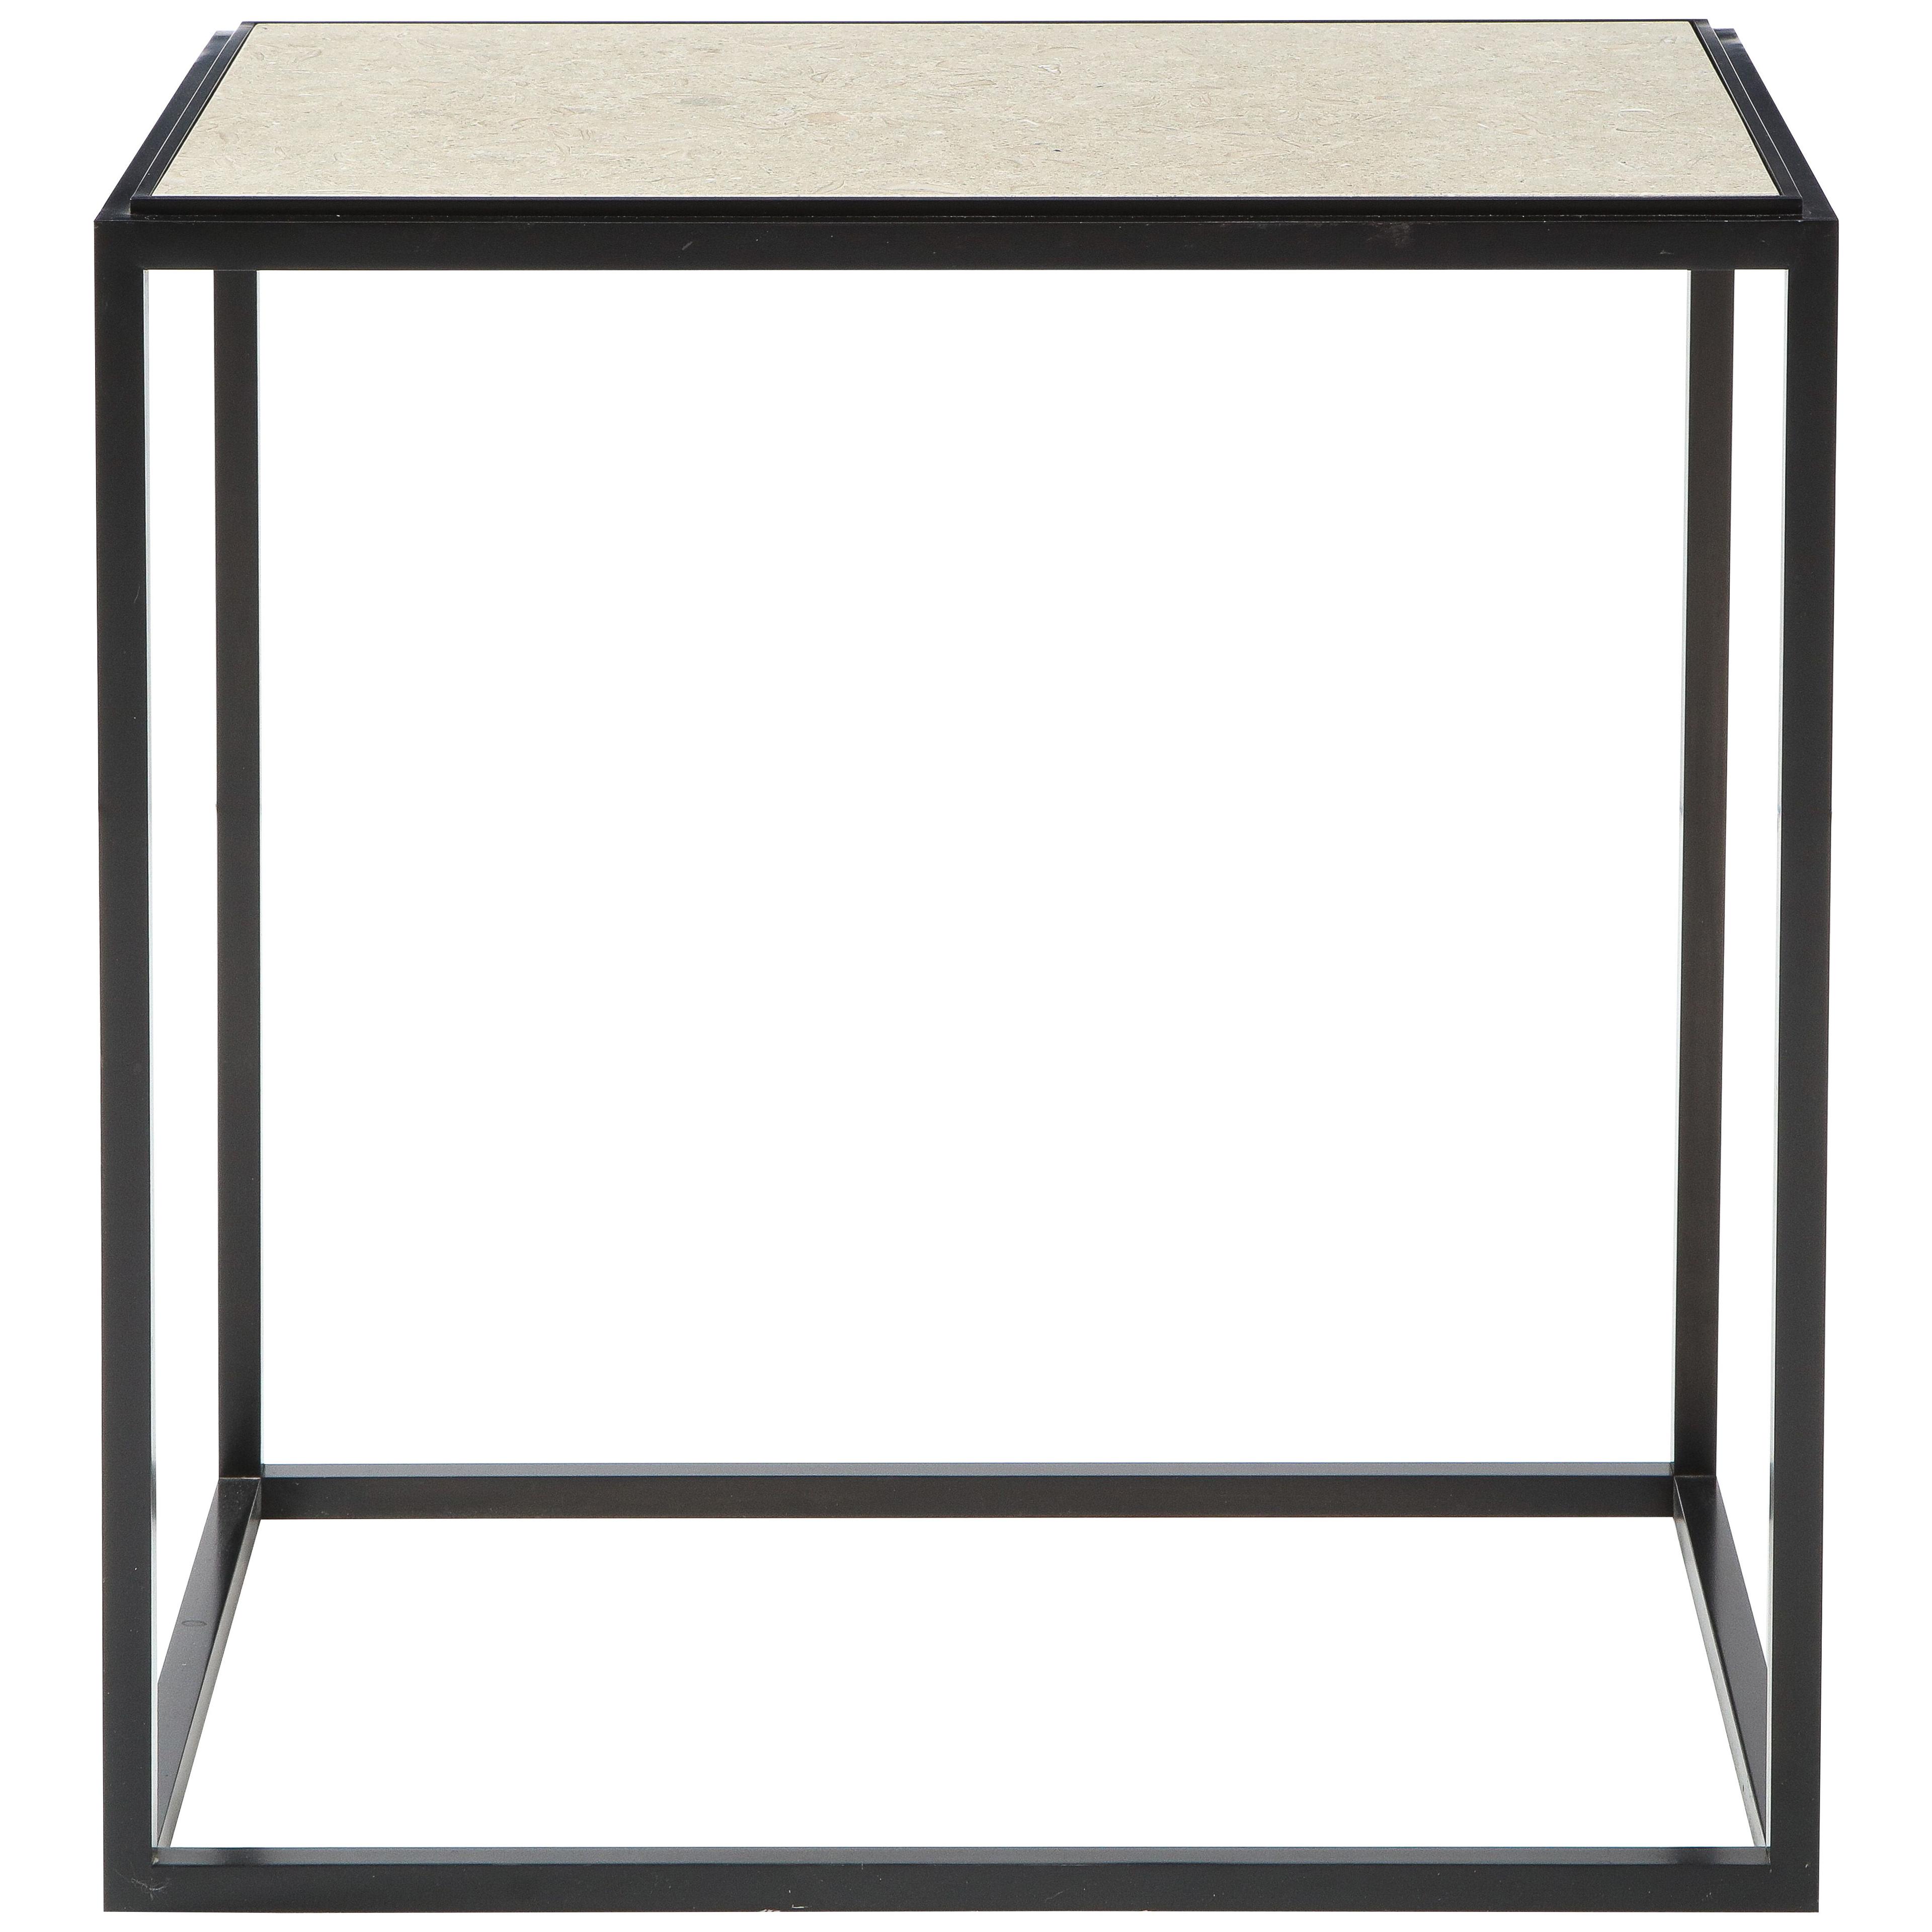 Custom Made to Order Inset Stone Top Table with Solid Hand Blackened Metal Base